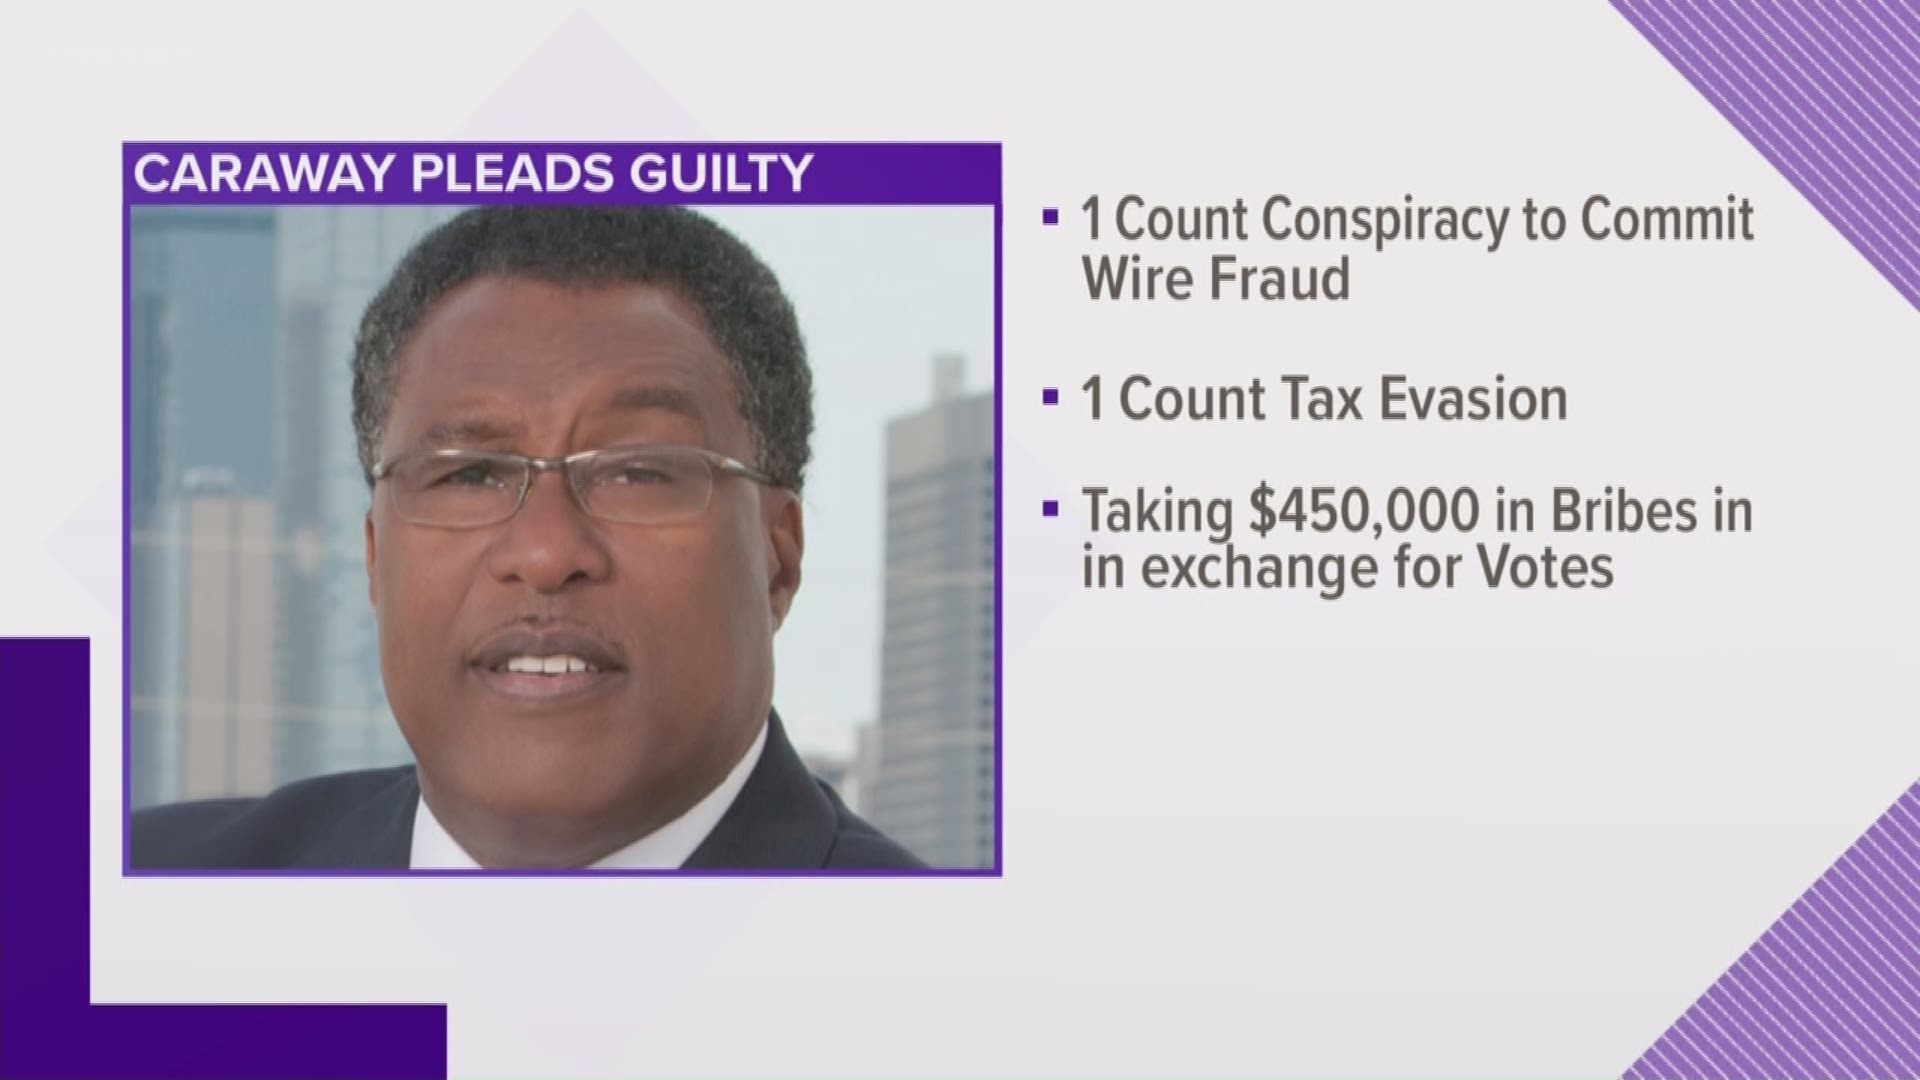 Dallas Mayor Pro Tem Dwaine Caraway resigns, pleads guilty to federal corruption charges